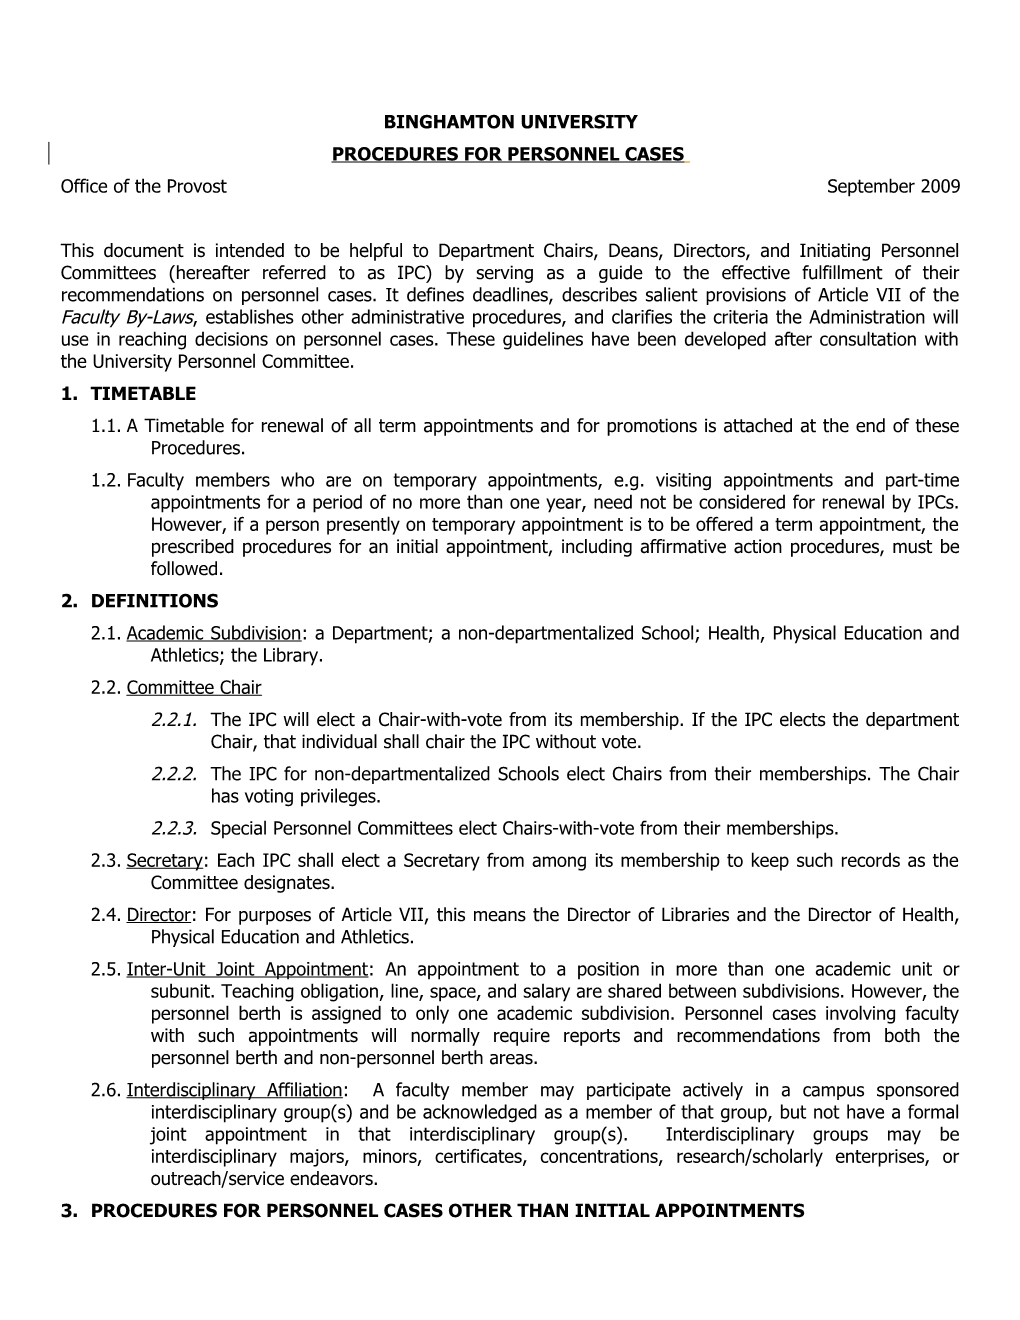 2009 Provost S Procedures for Personnel Cases- 1September 2009